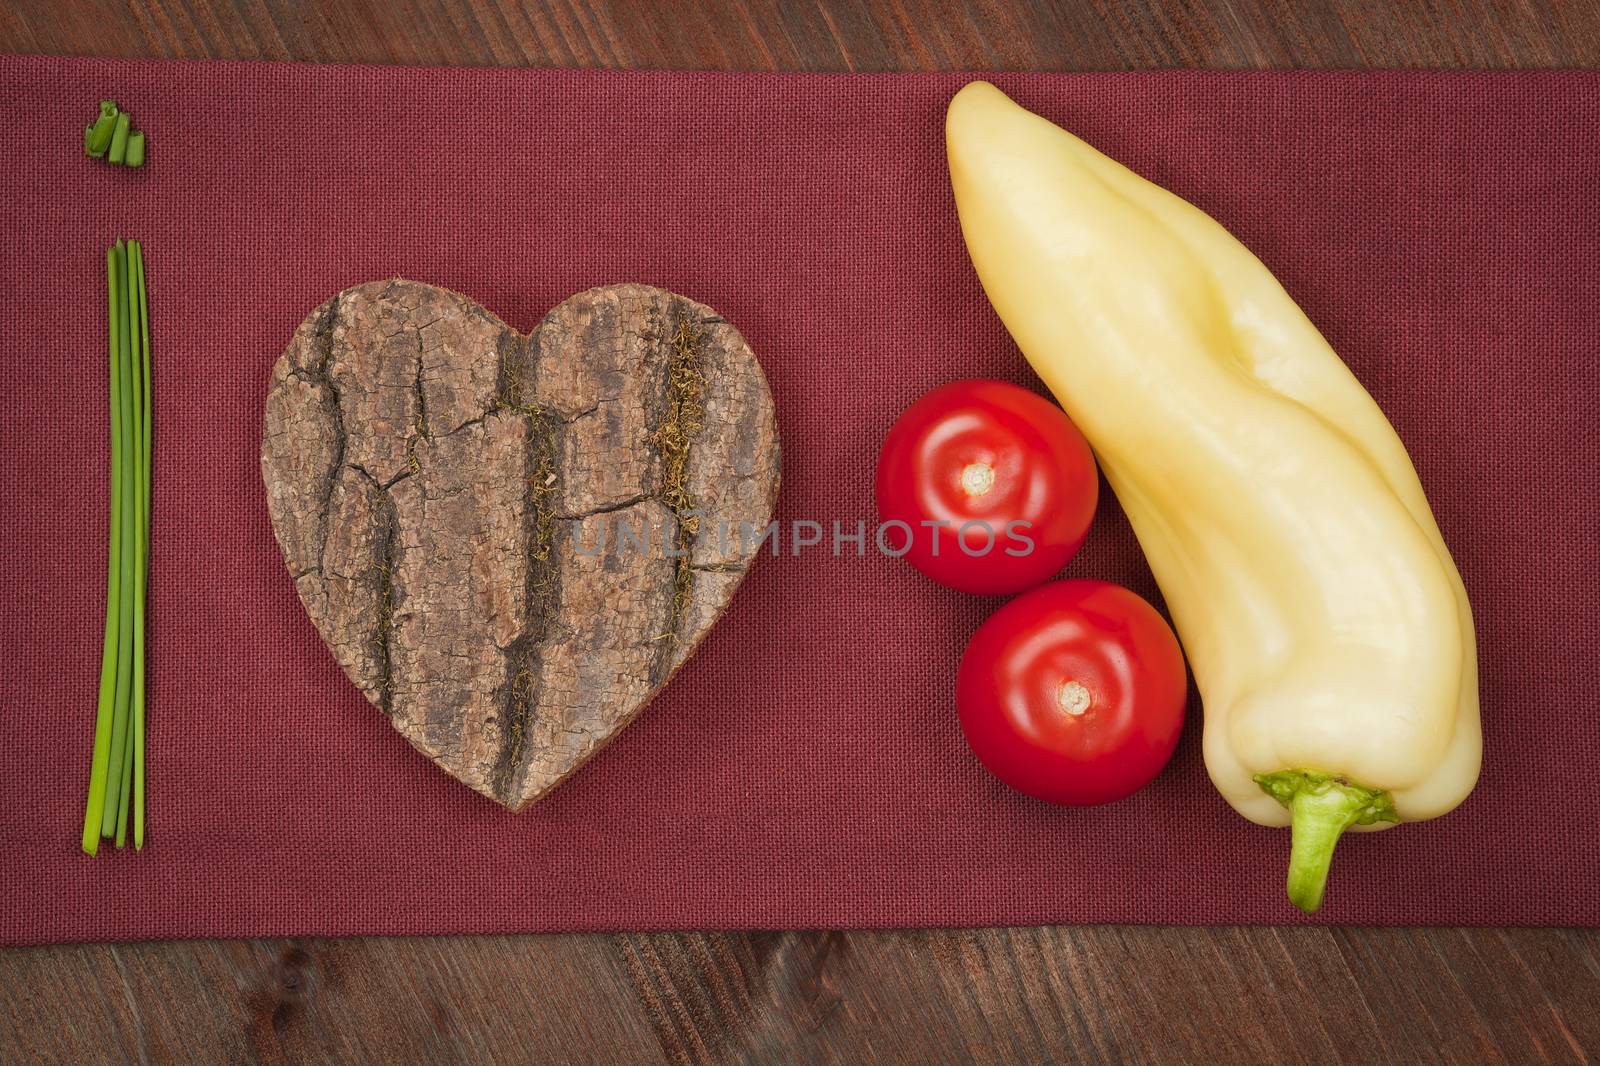 I love vegetable made of chive, wooden heart, tomatoes and green pepper on burgundy cloth. Agriculture background.